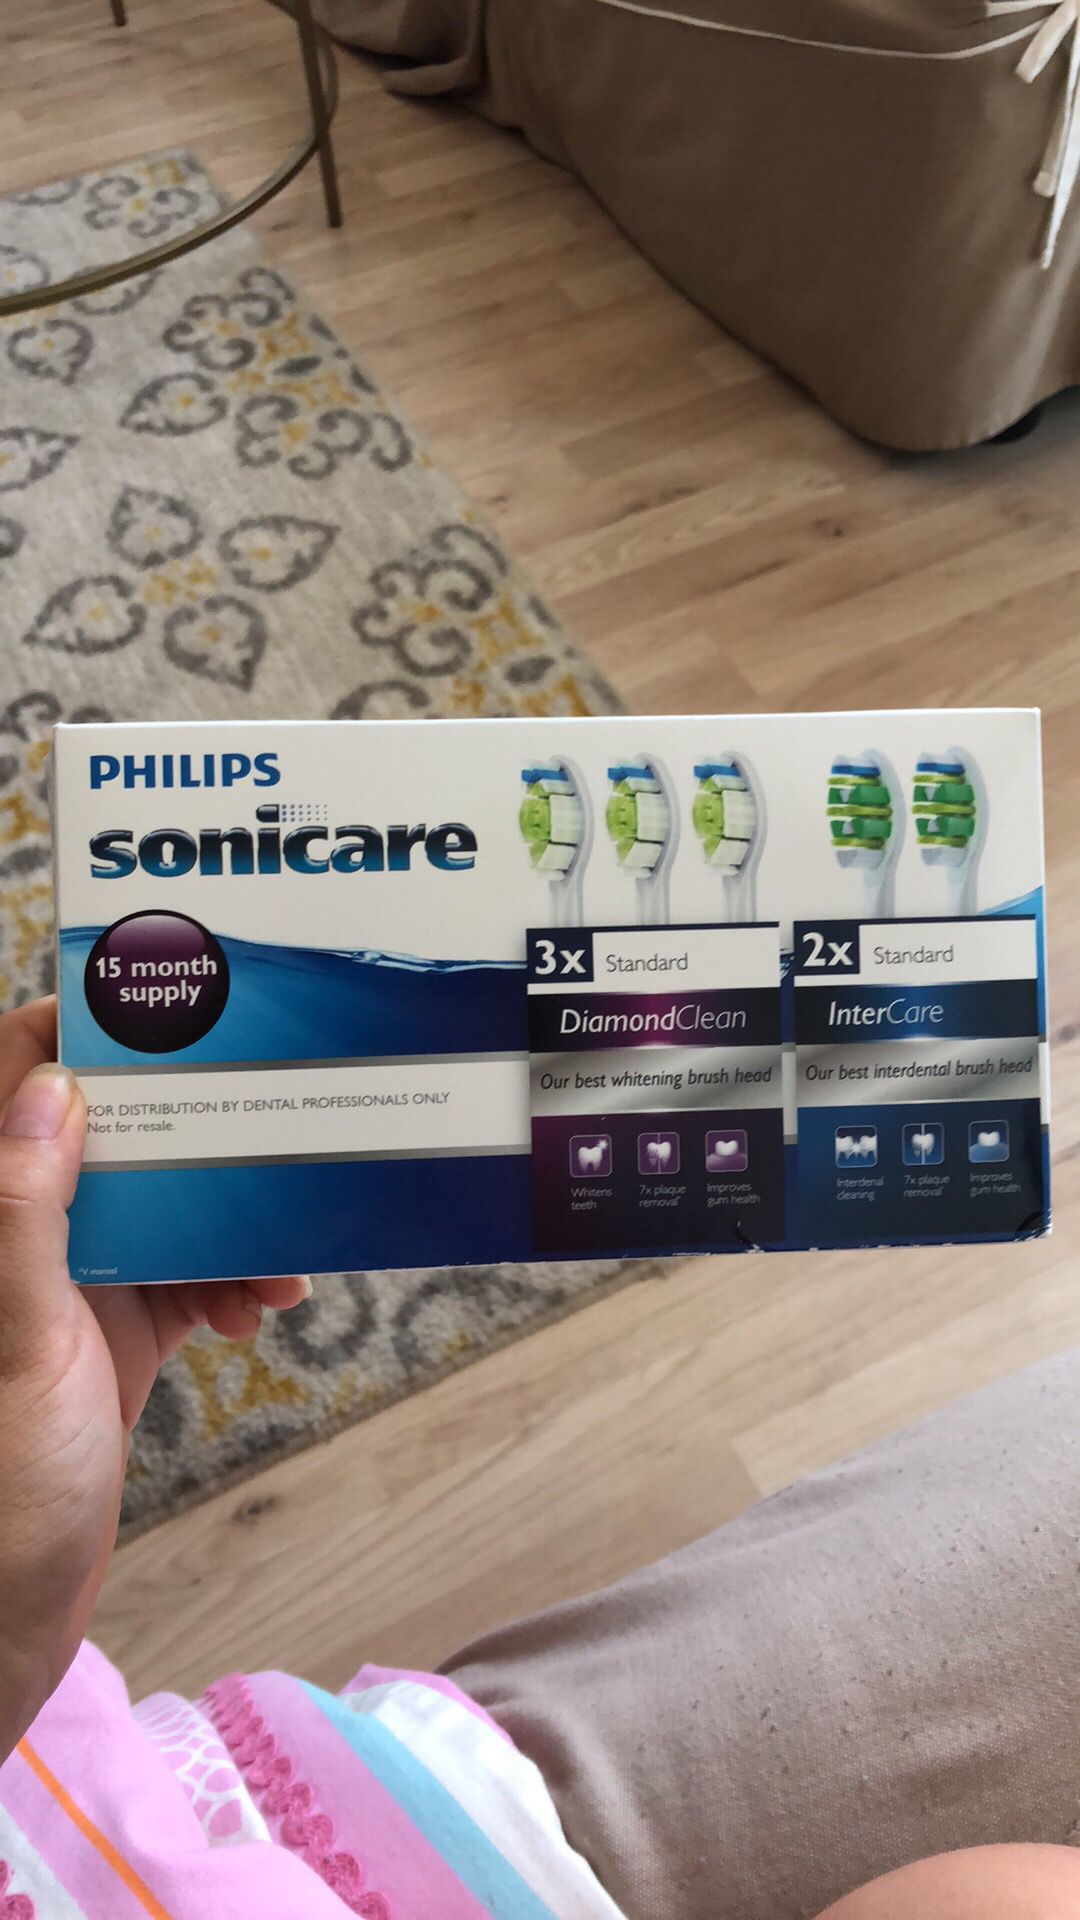 Philips Sonicare 5-pack of Refills